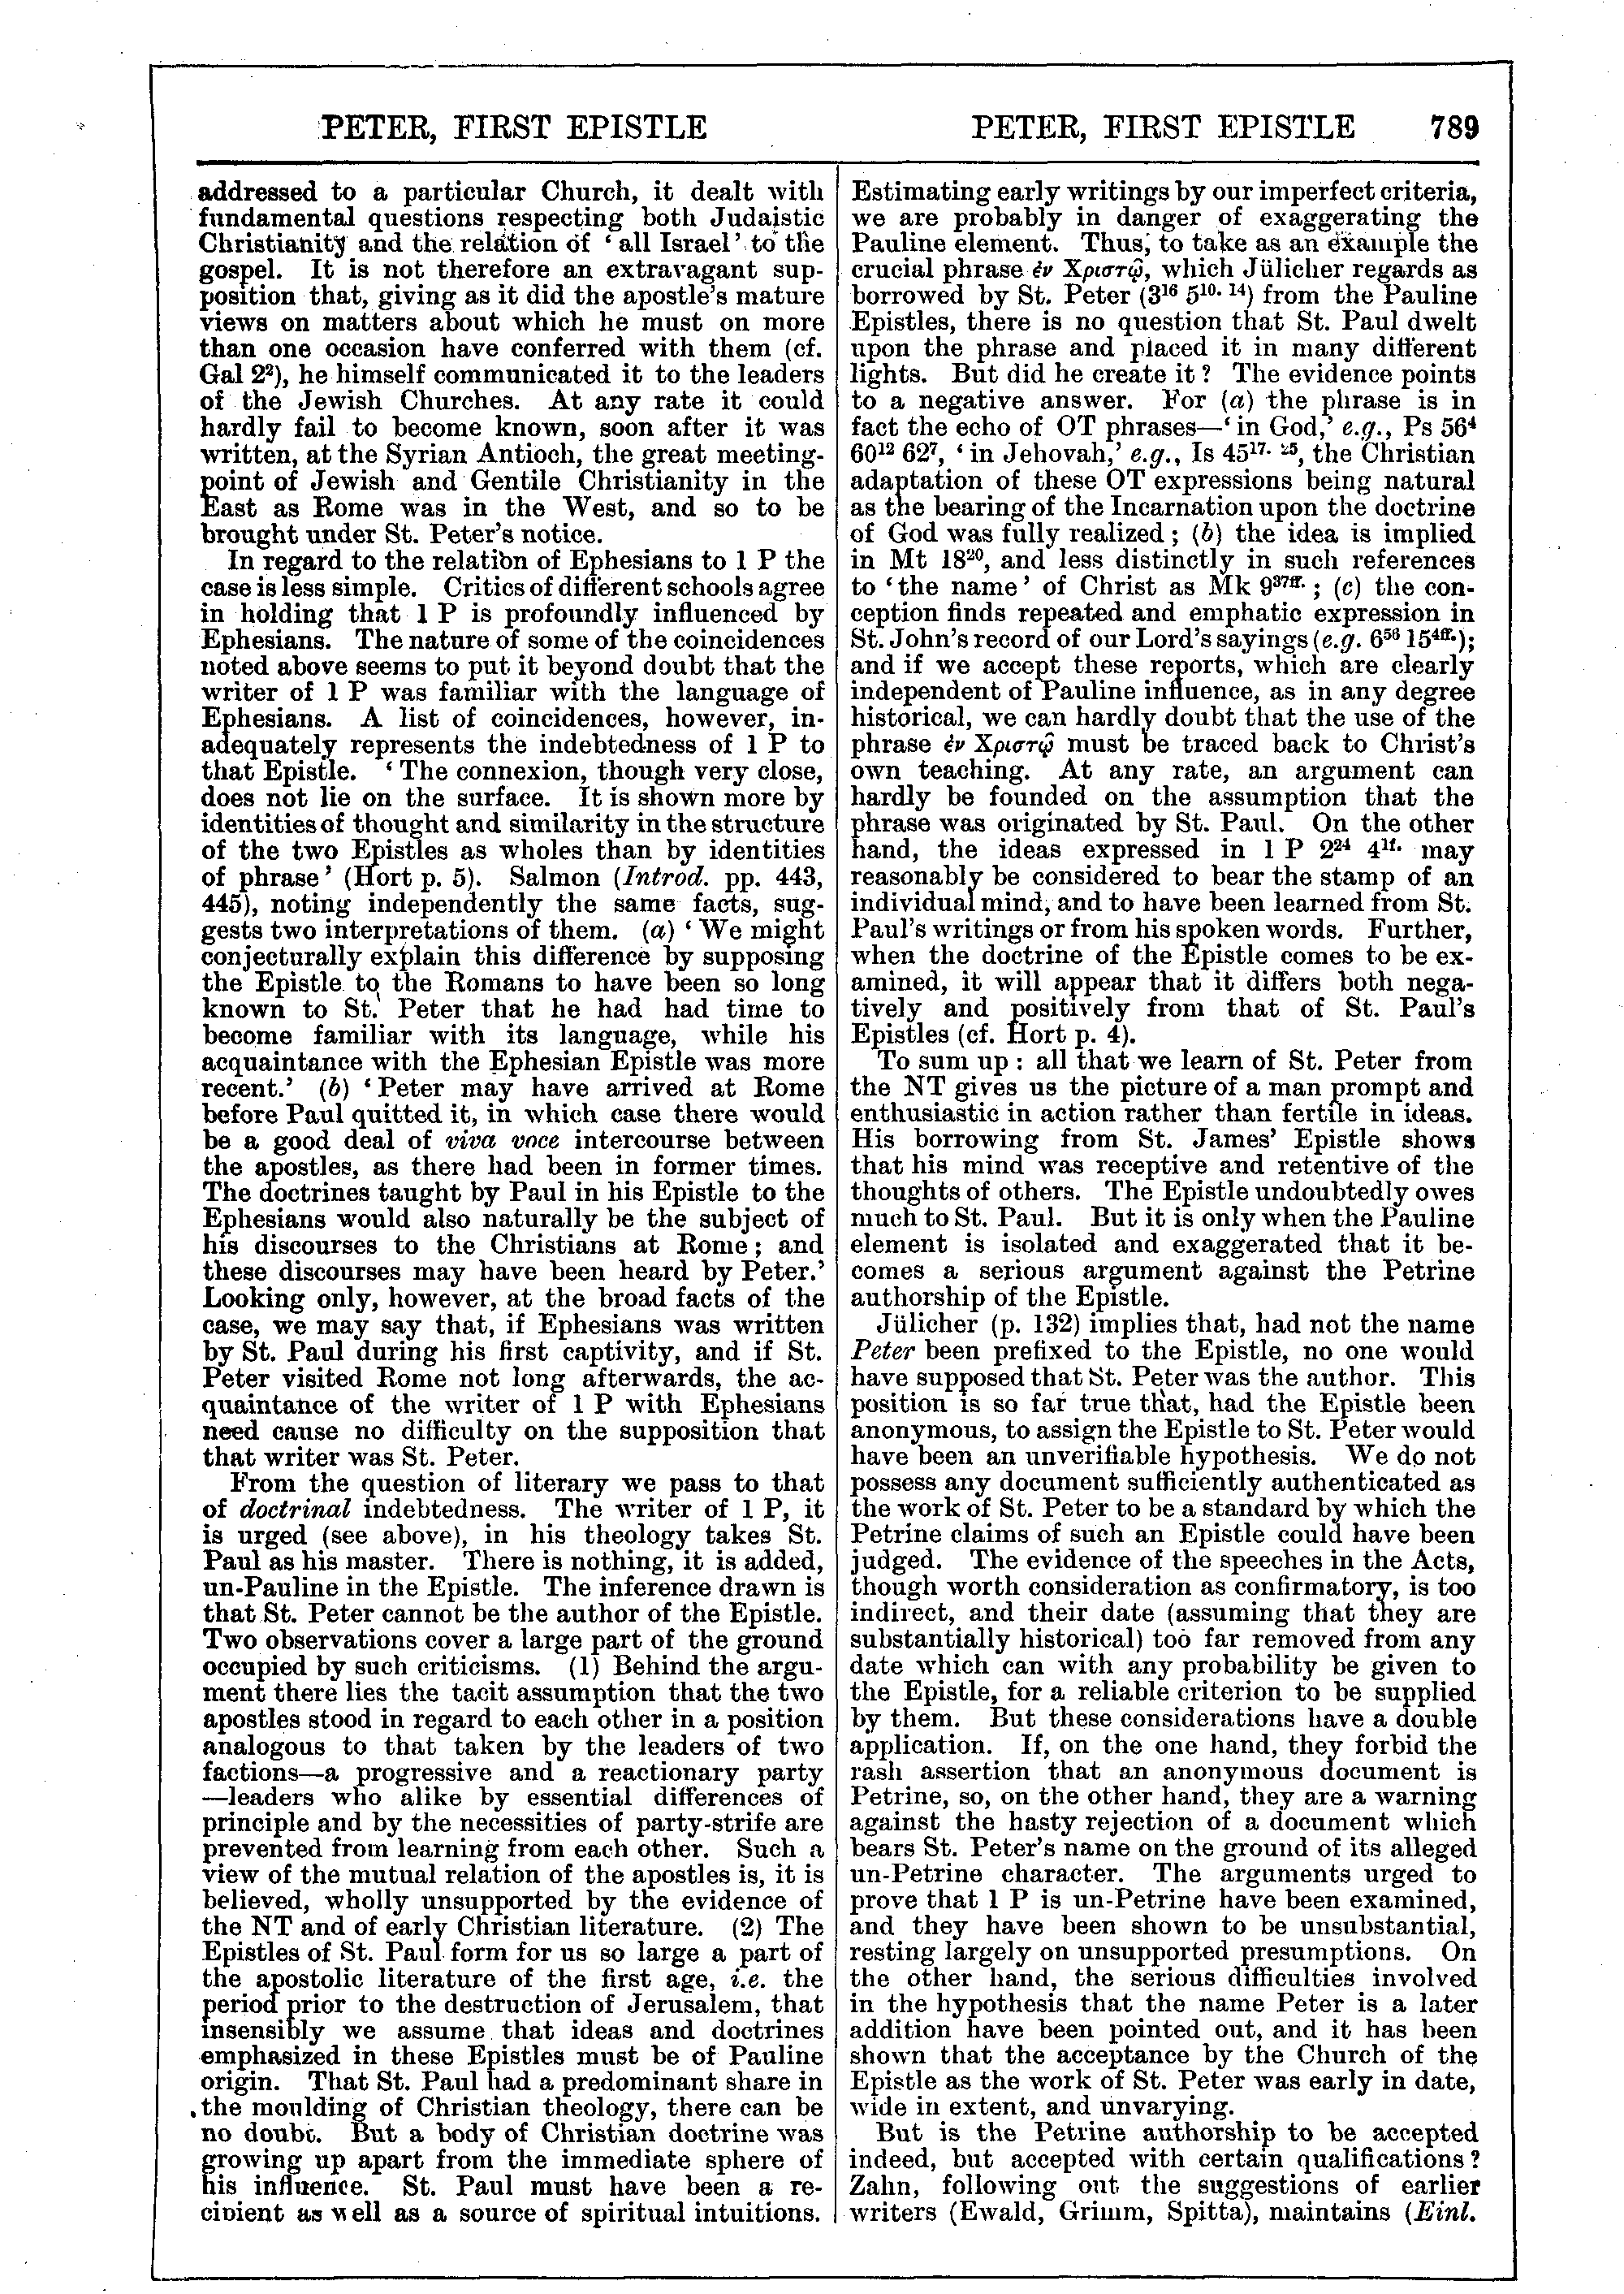 Image of page 789